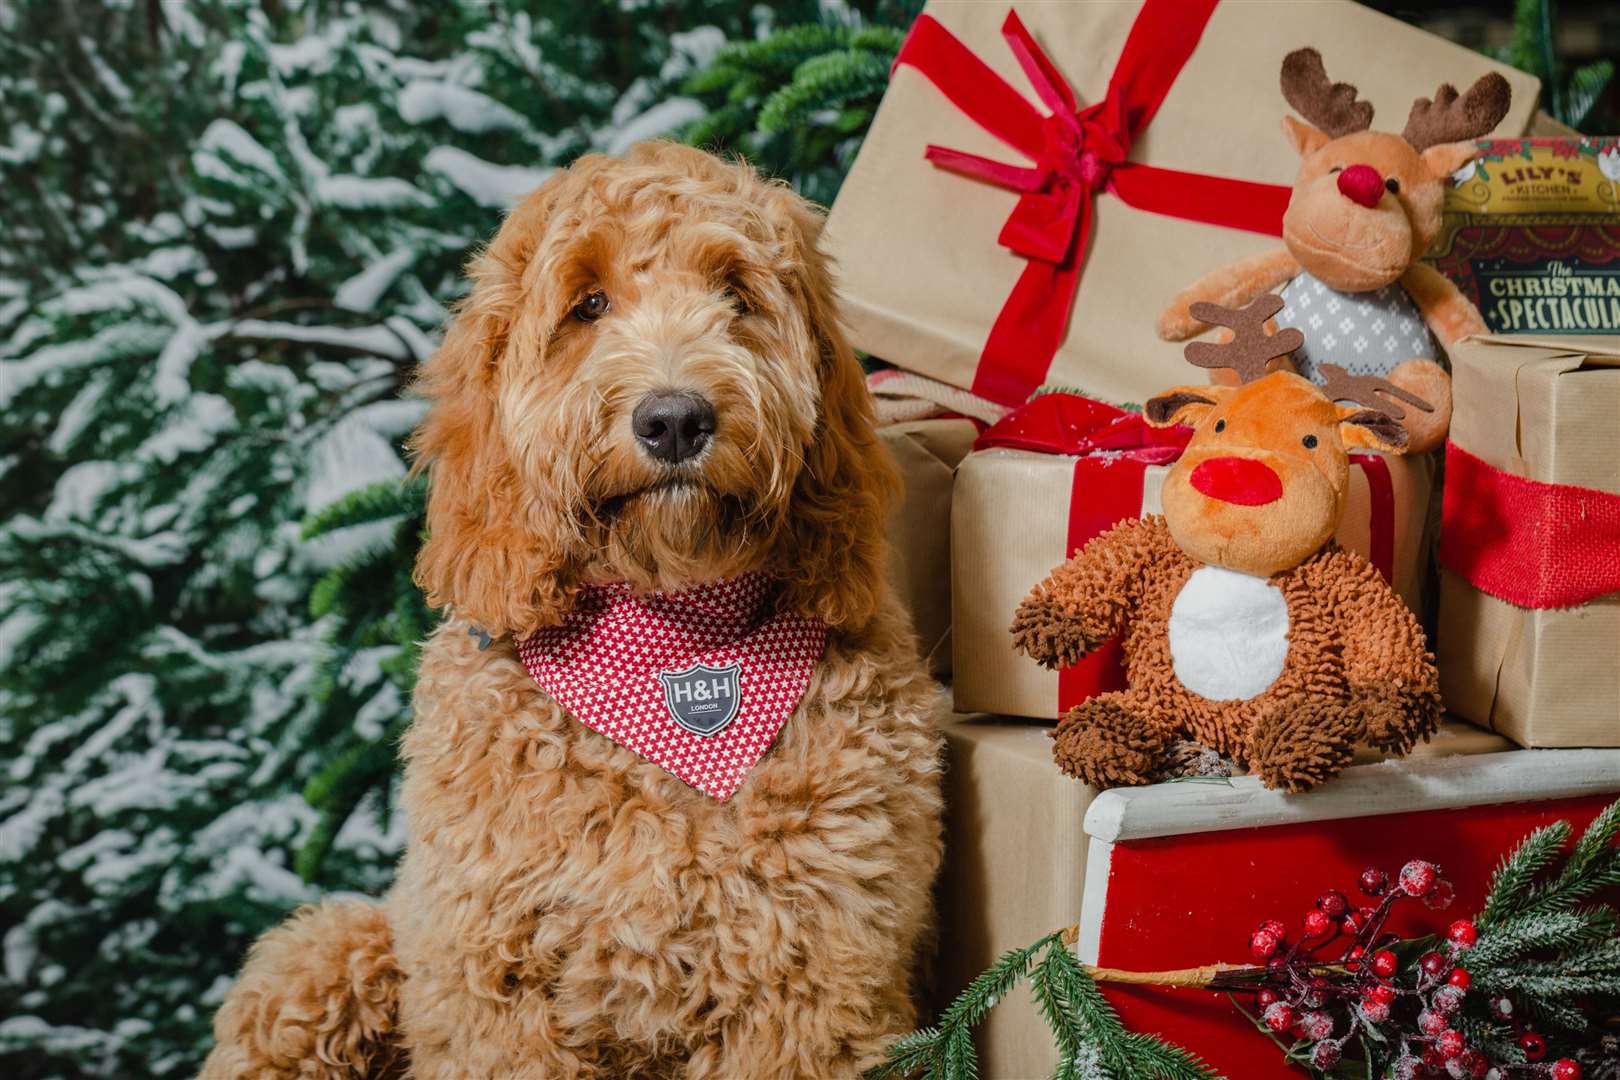 Pet owners can book in for selfies with Santa Paws at Dobbies Garden Centre.